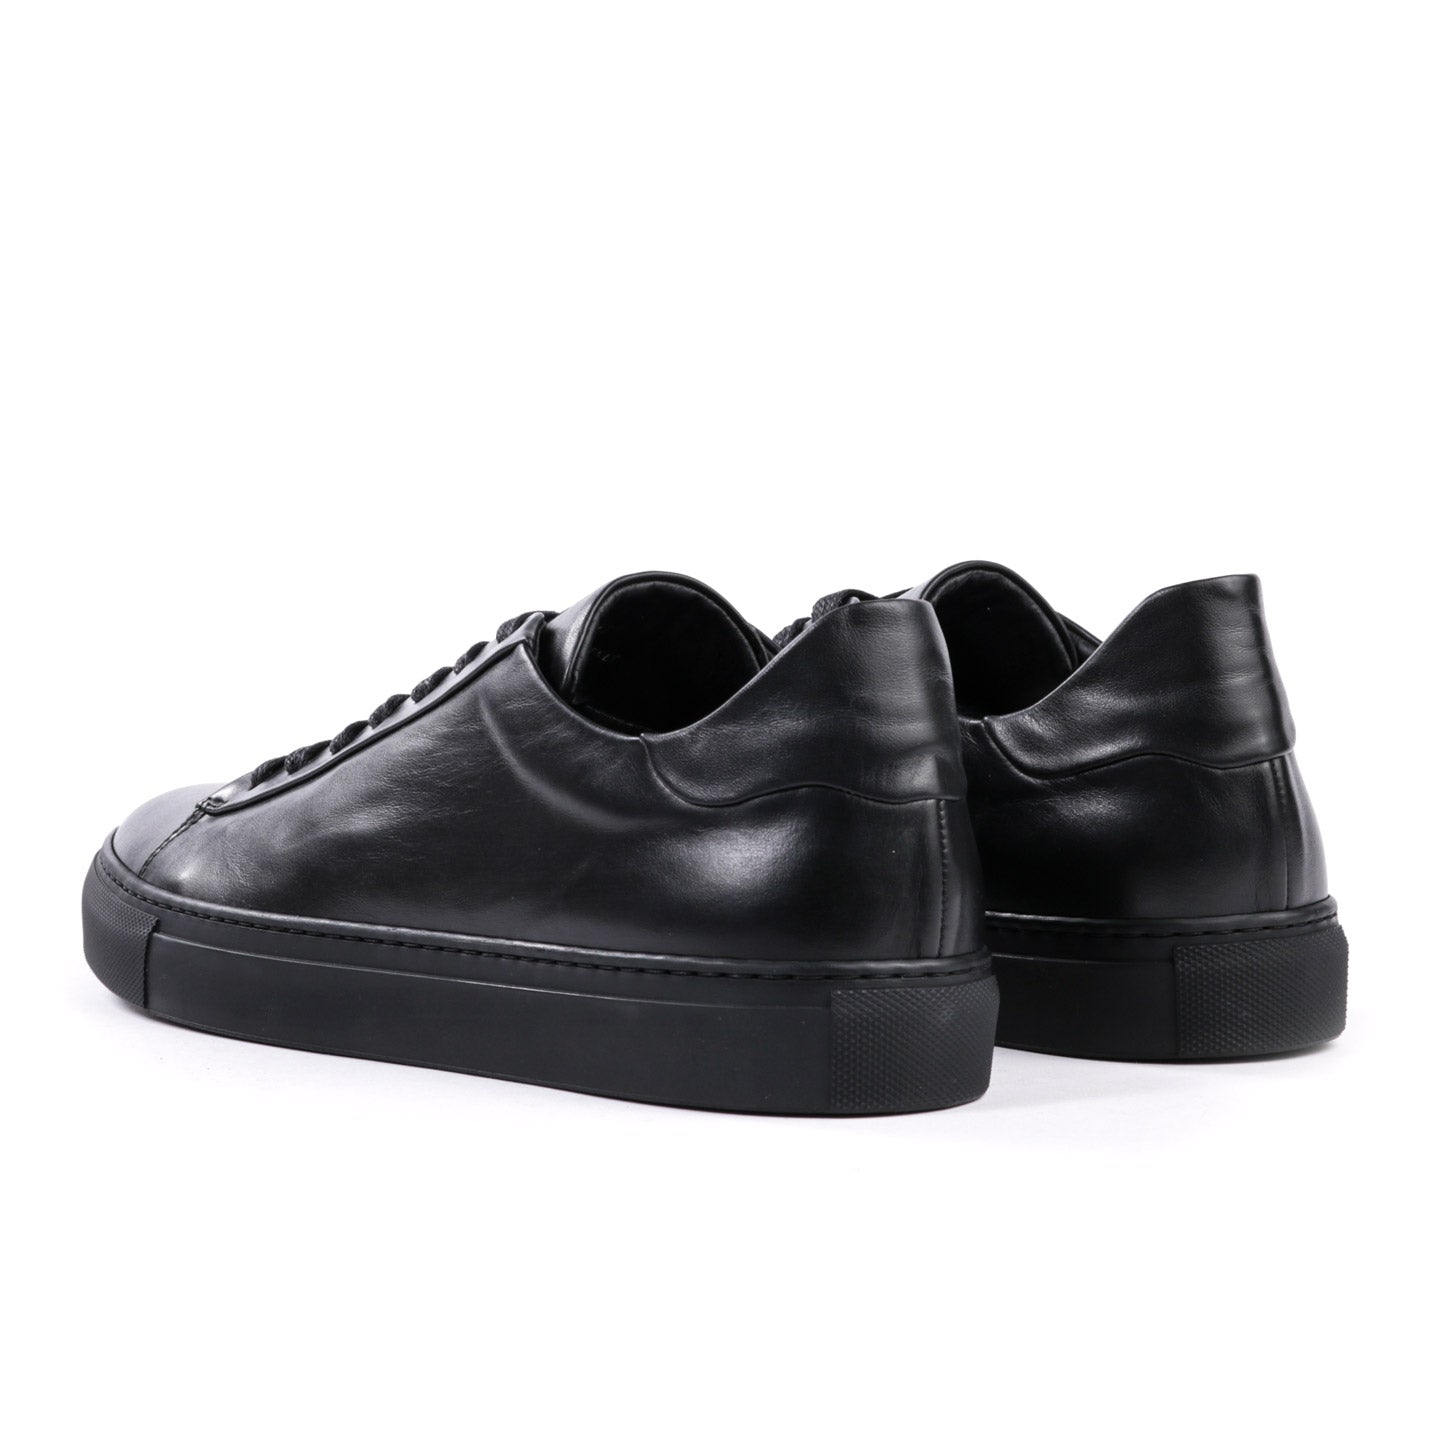 WINGS + HORNS COURT LOW SOFTY LEATHER BLACK / BLACK